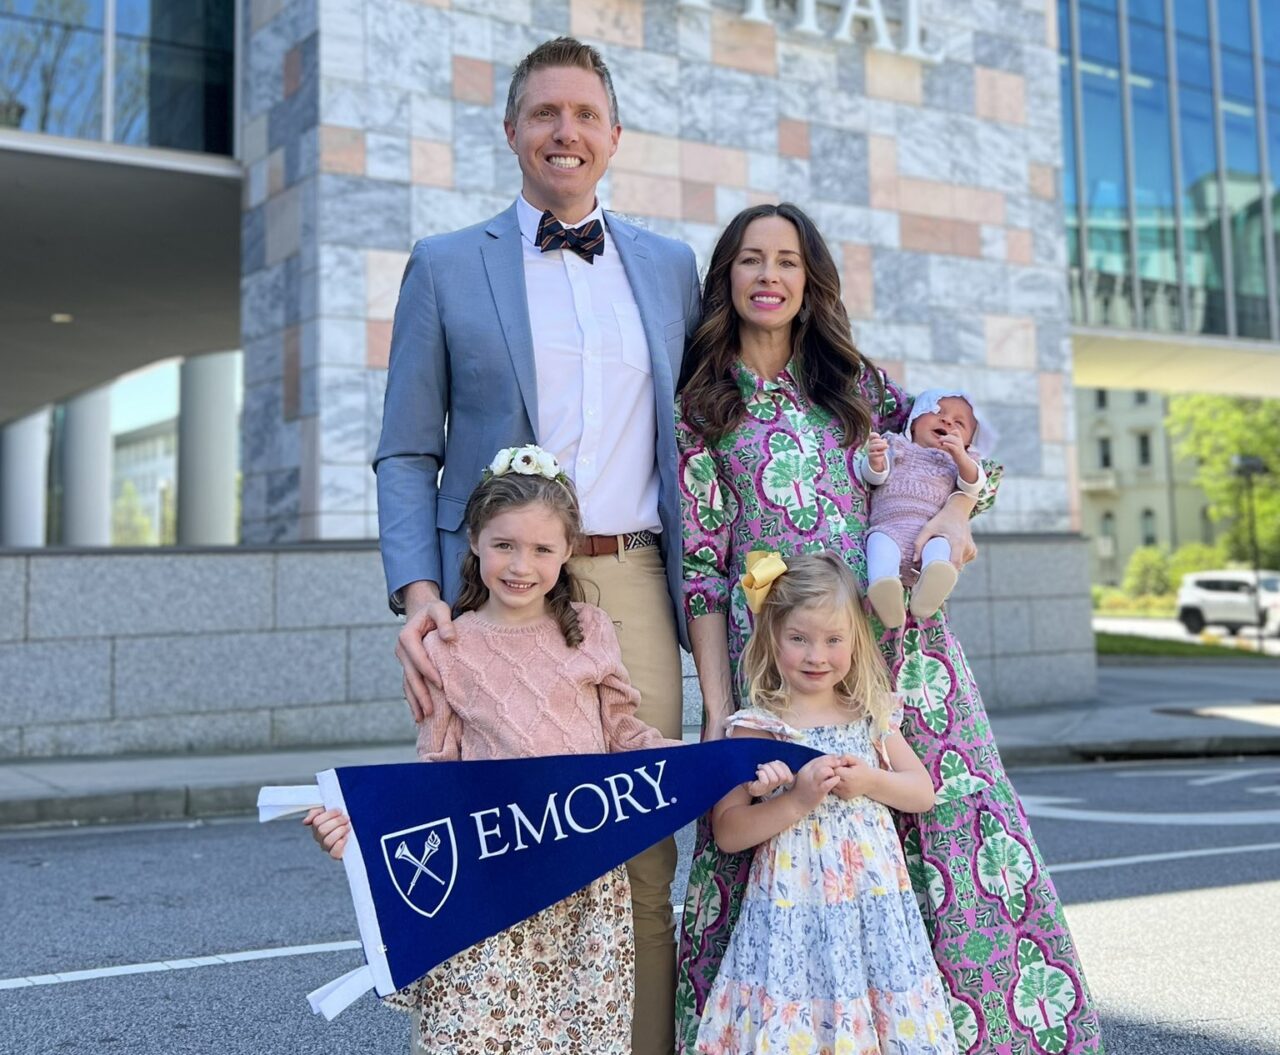 Ryan Haumschild: I am incredibly honored to announce my recent promotion to the role of Vice President of Ambulatory Pharmacy at Emory Healthcare and Winship Cancer Institute